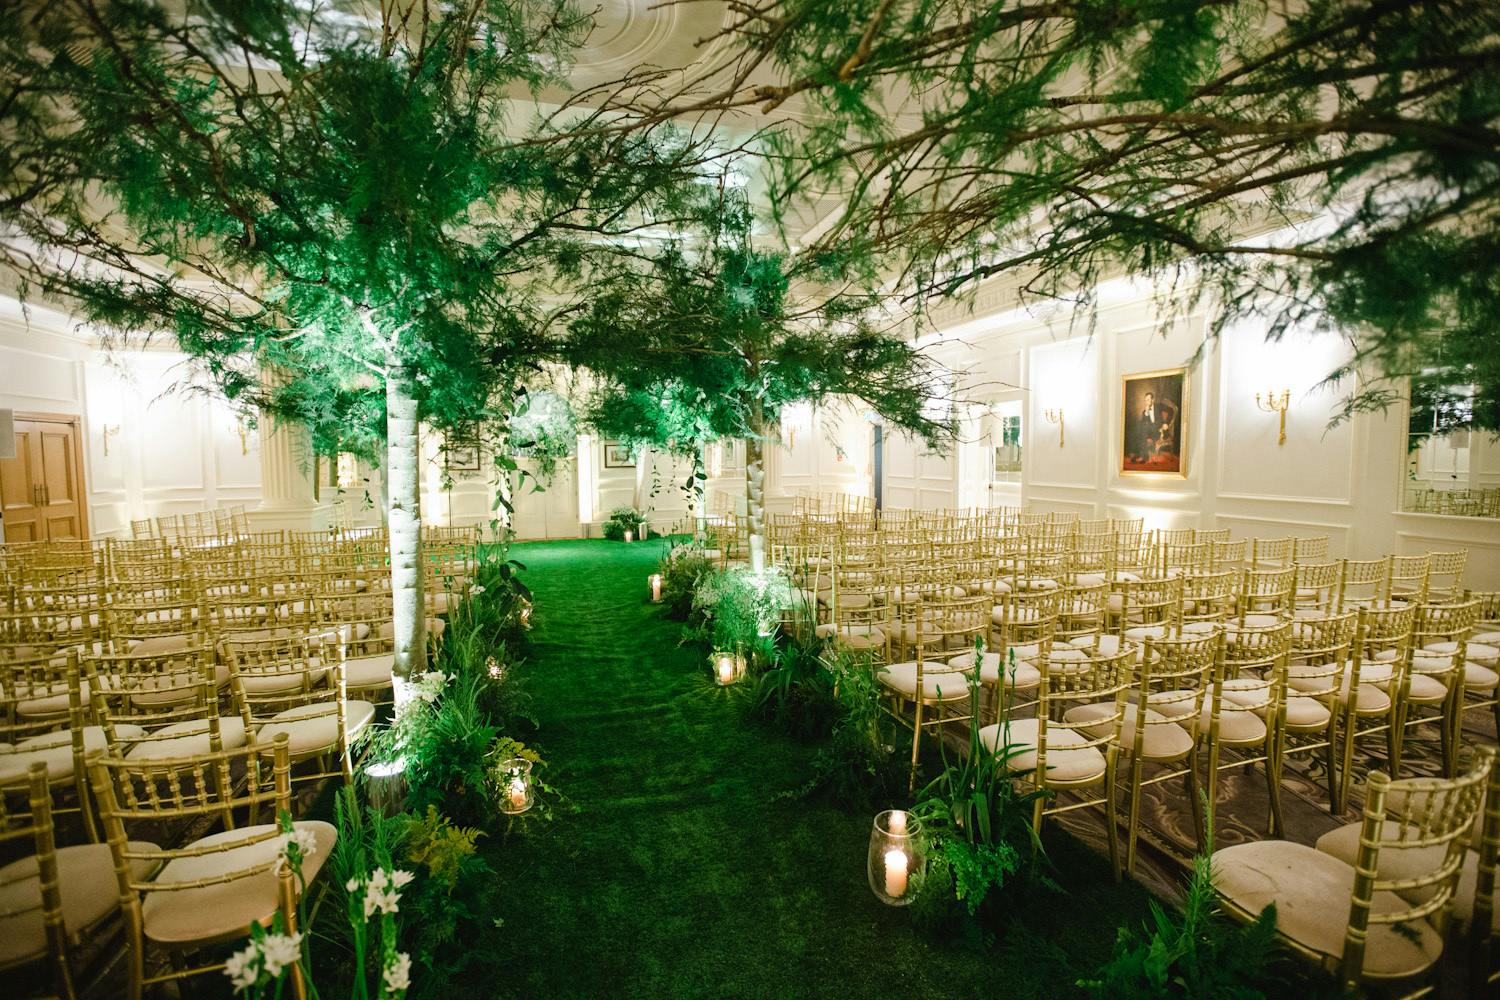 An Enchanted Forest Inspired Wedding With Greenery Aisle Décor | PartySlate